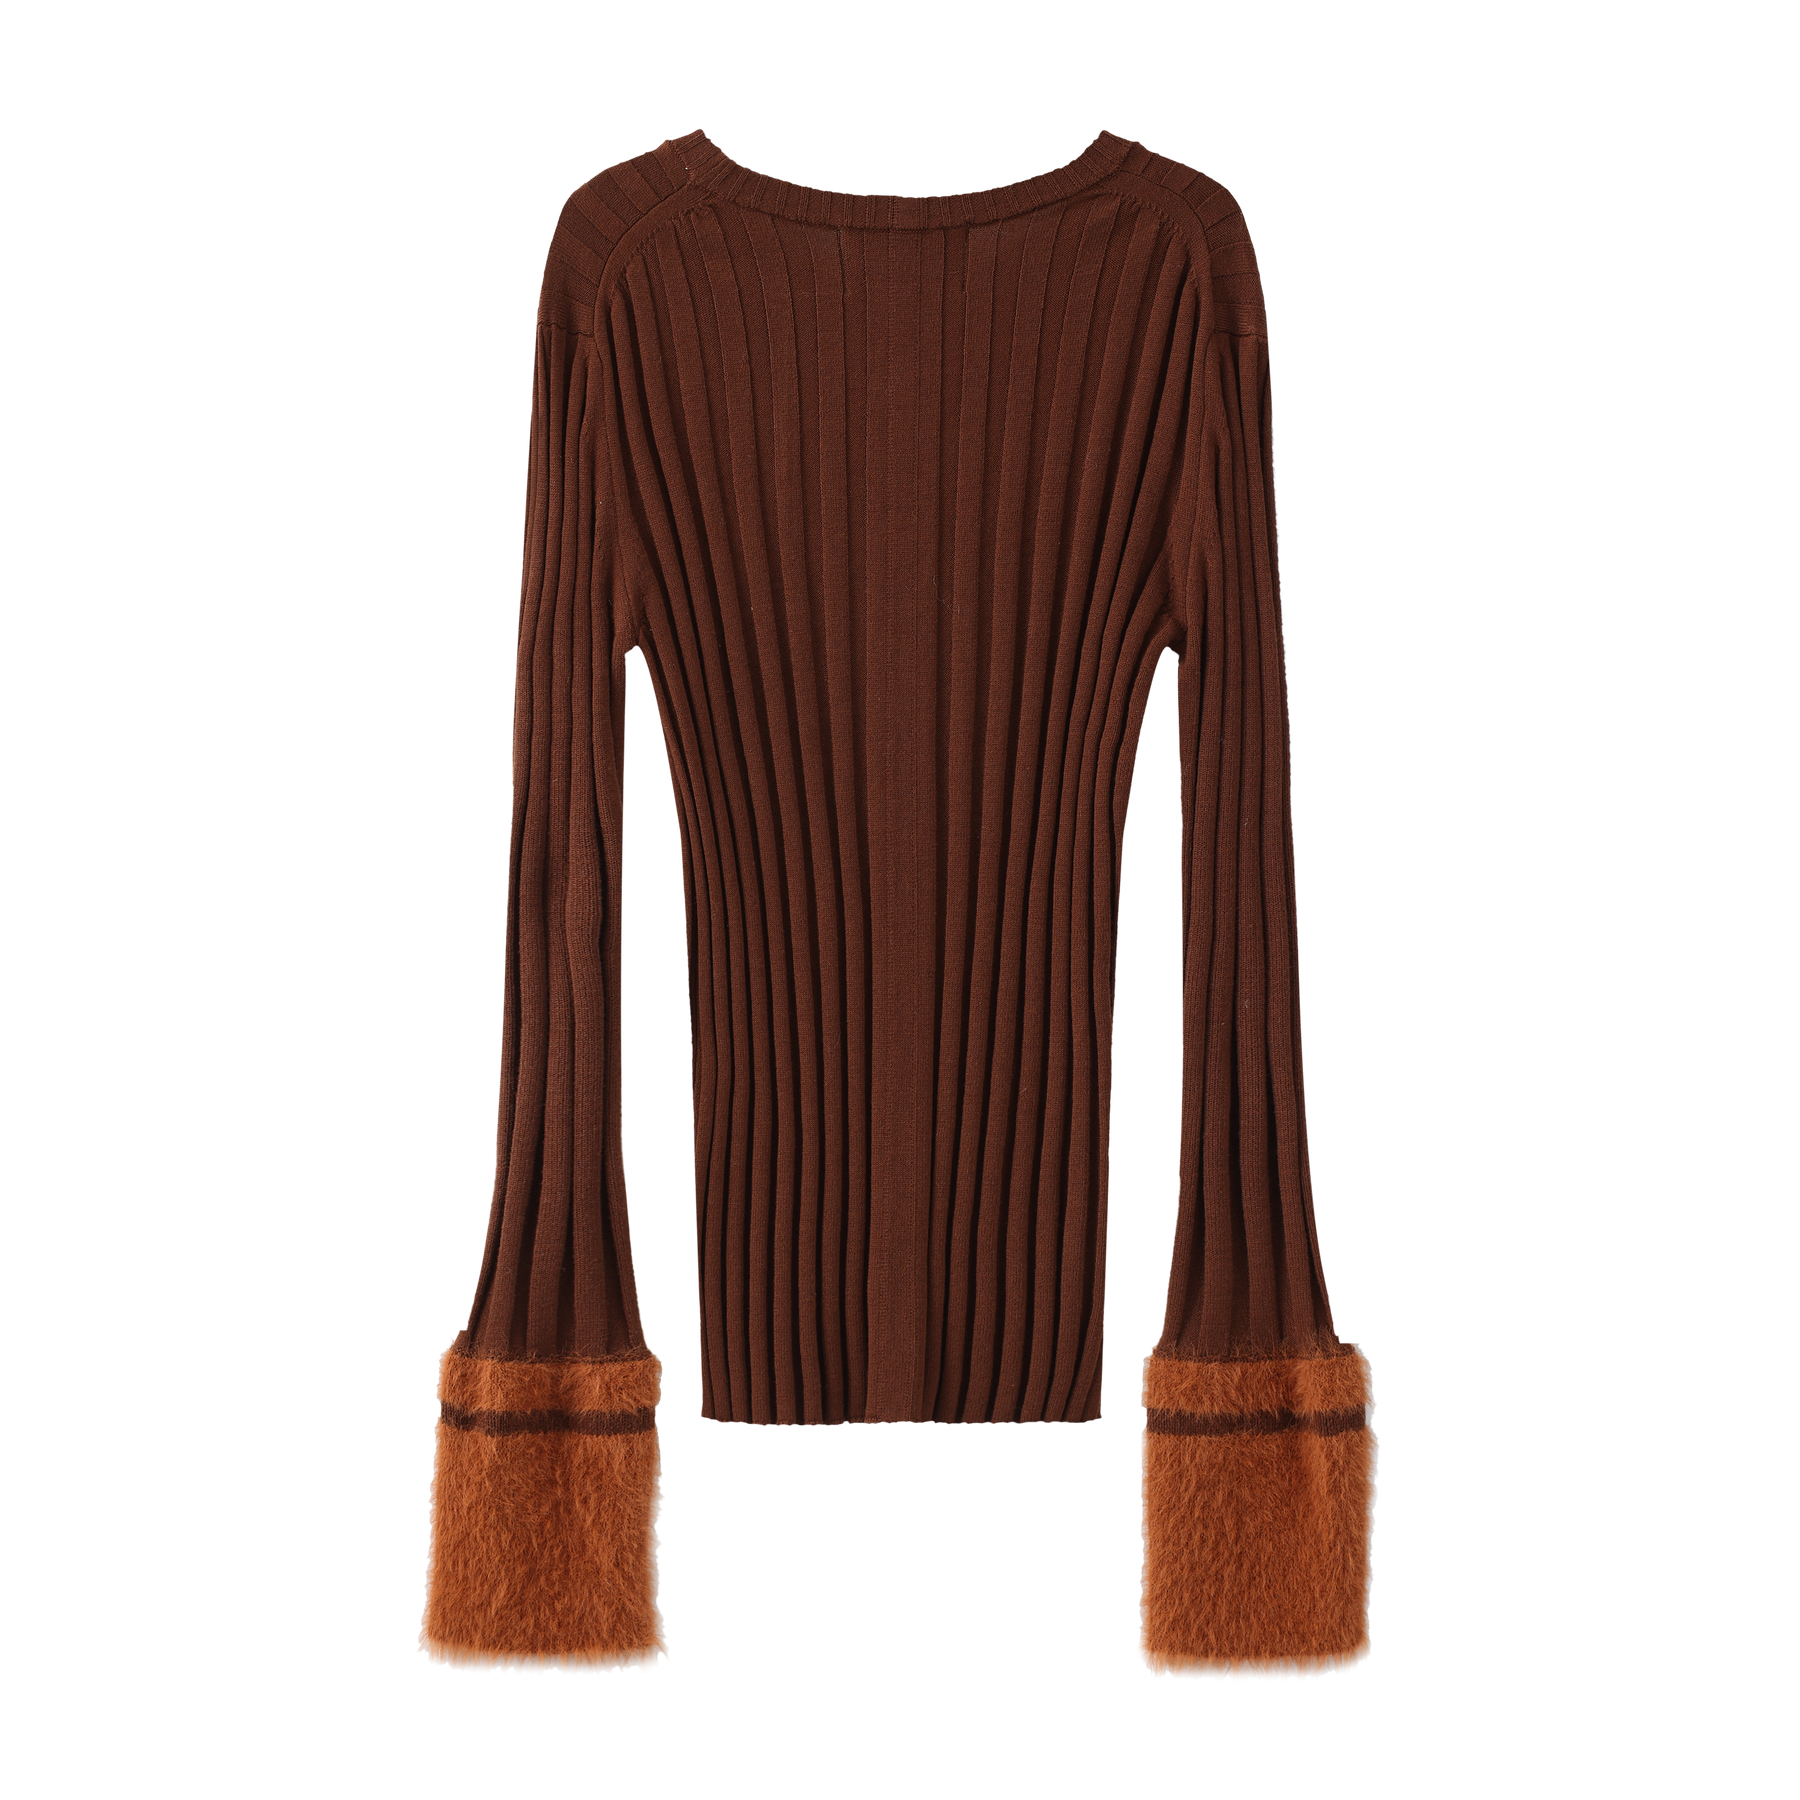 Fuzzy Sleeve Knit sweater - Brown